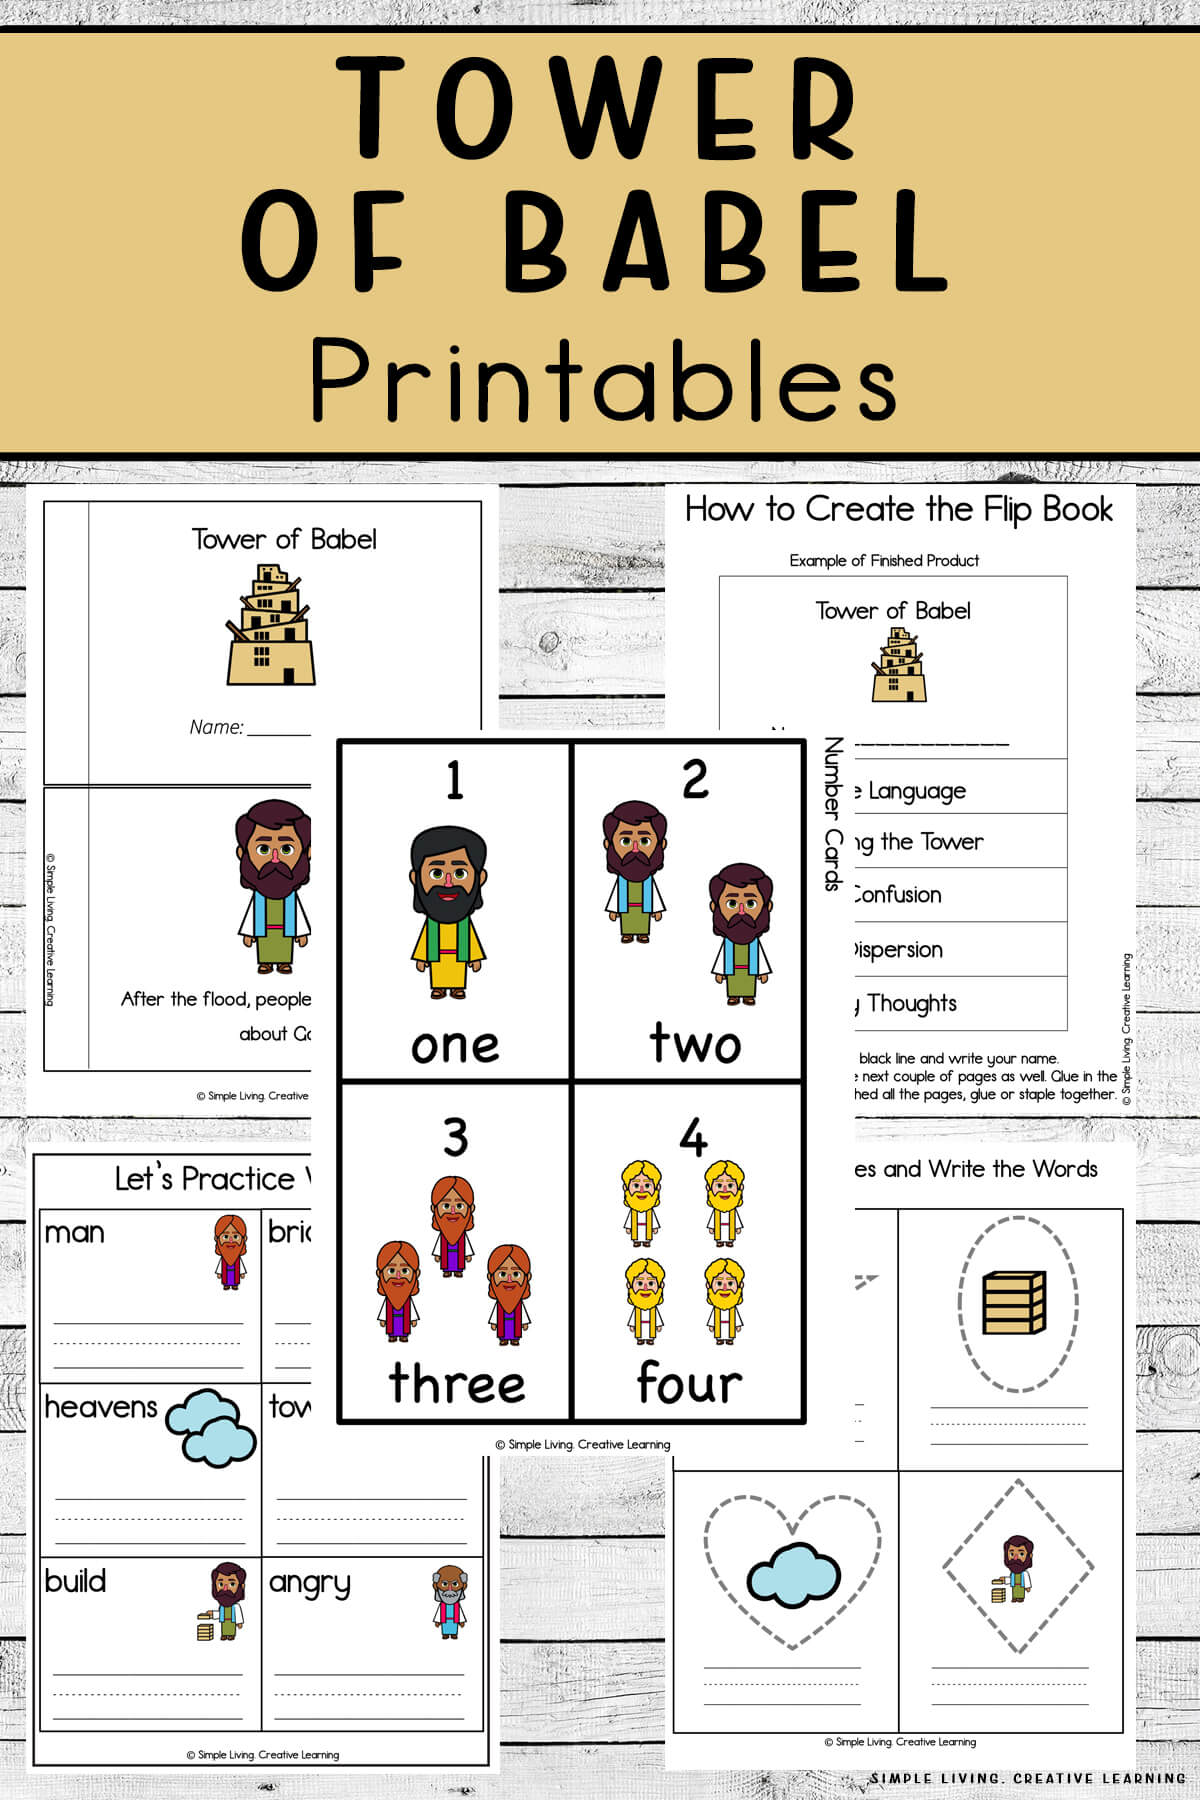 Tower of Babel Printables